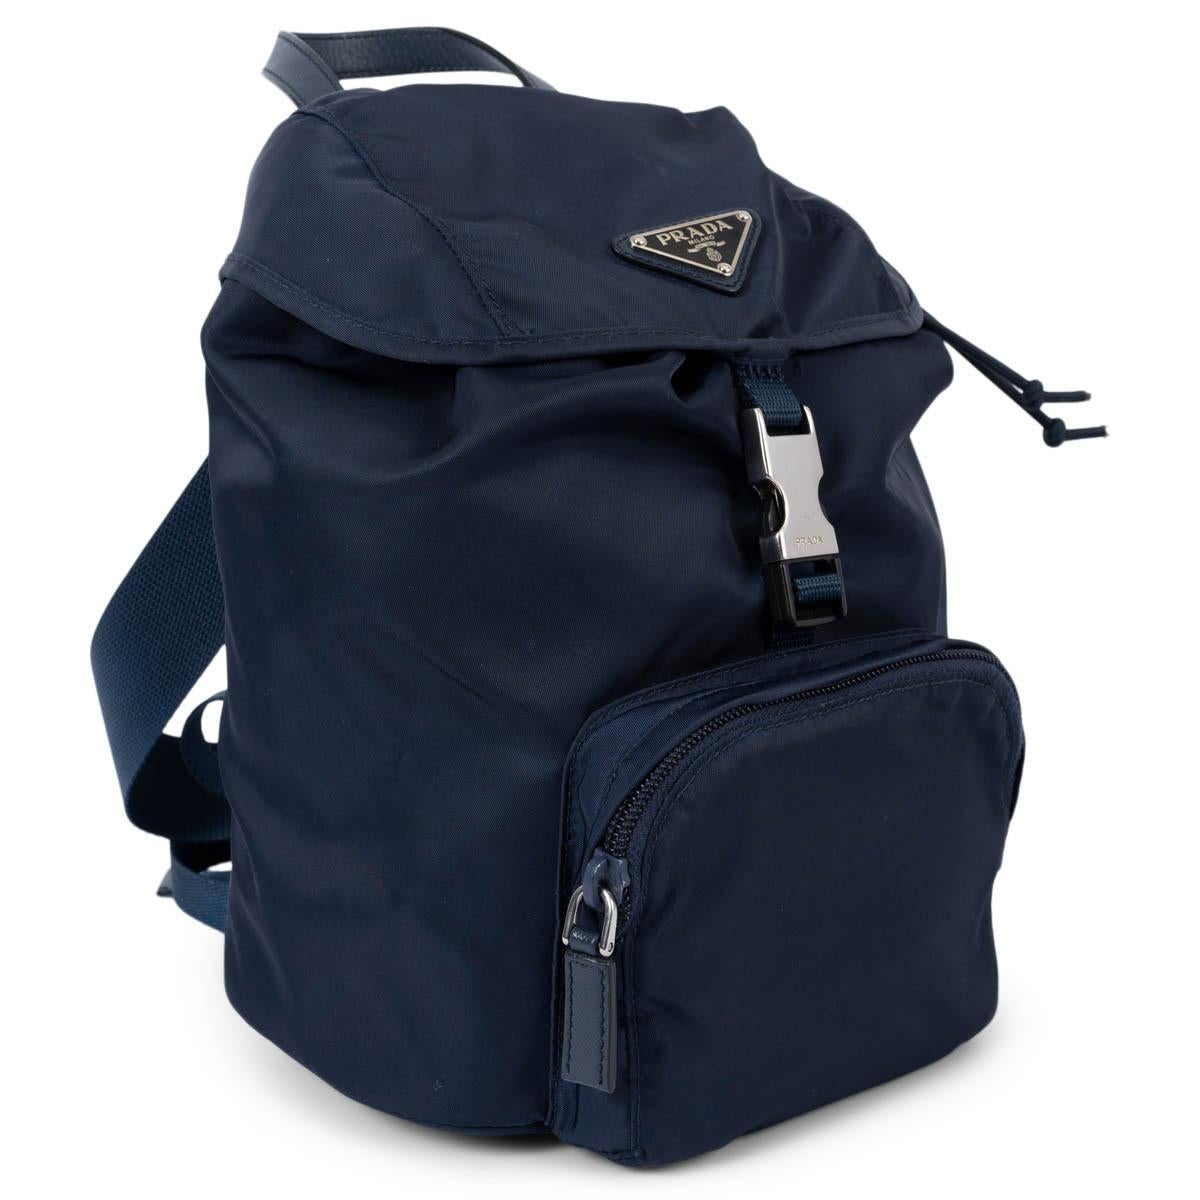 100% authentic Prada Vela backpack bag in navy blue nylon featuring silver-tone hardware. The design comes with two adjustable canvas strap, a zipped front pocket and a drawstring closure und the flap. Lined in navy blue logo canvas with a zipper